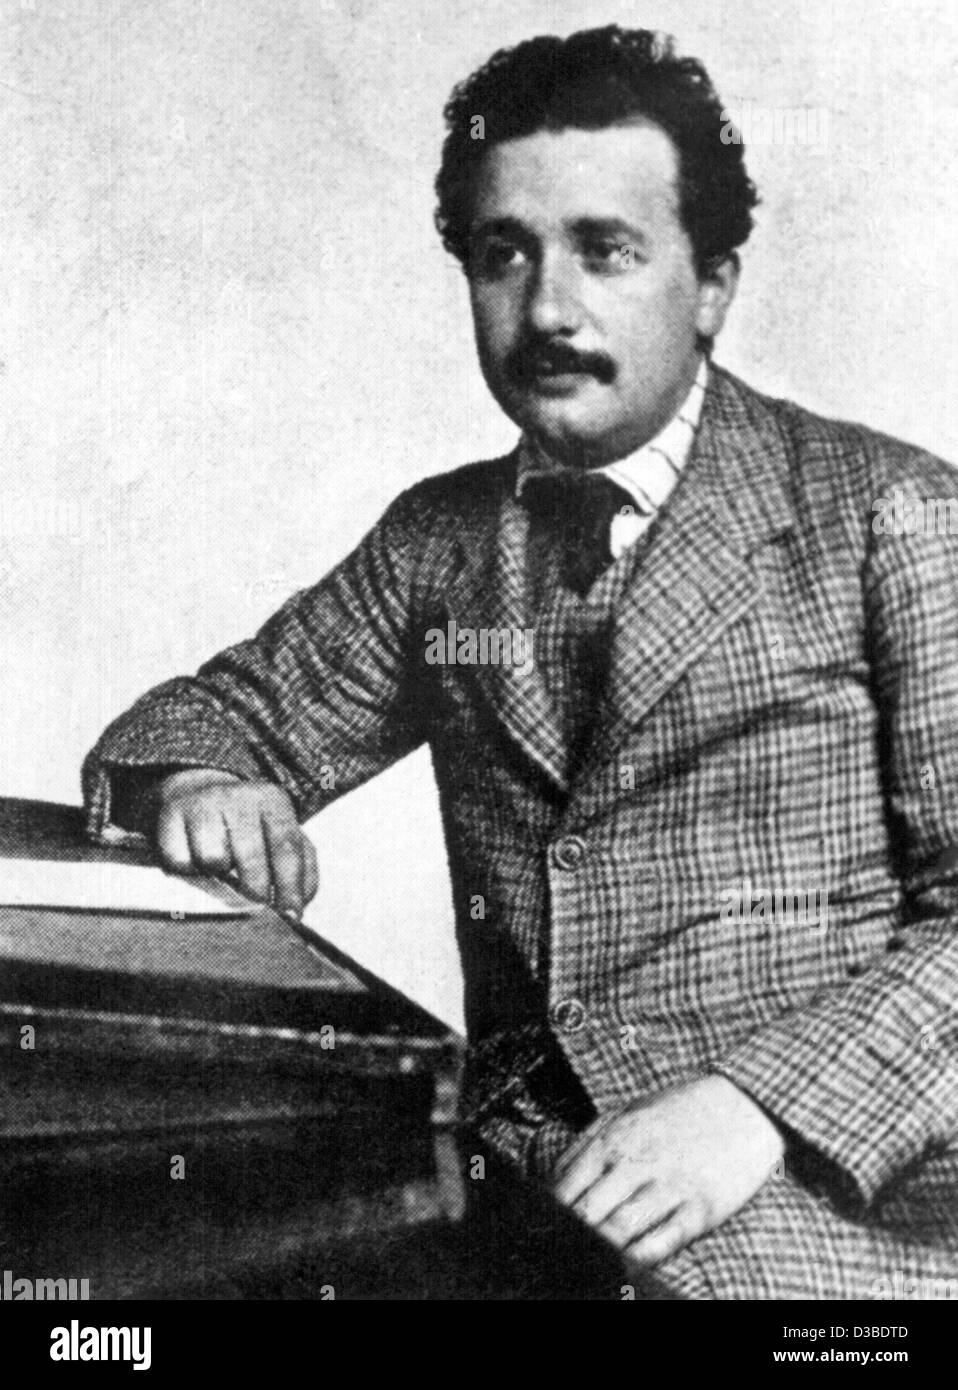 (dpa files) - German-American physicist and mathematician Albert Einstein in Germany, 1905. He was born to a Jewish family in Ulm, Germany, on 14 March 1879 and died on 18 April 1955 in Princeton, New Jersey/USA. He is the founder of the theory of relativity with his formulation of the equivalence o Stock Photo